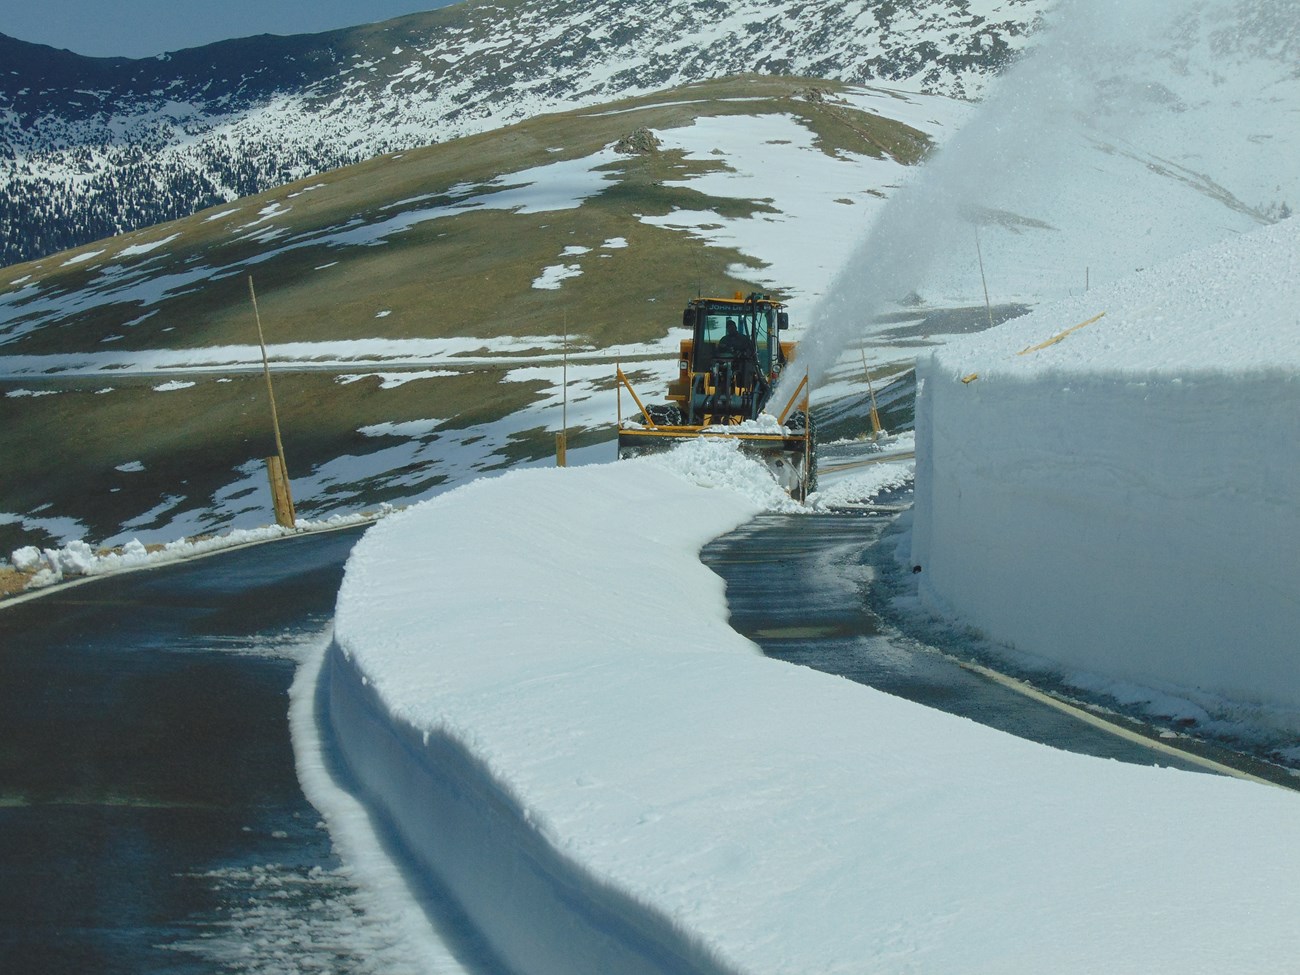 A rotary snowplow is clearning snow drifts from Trail Ridge Road